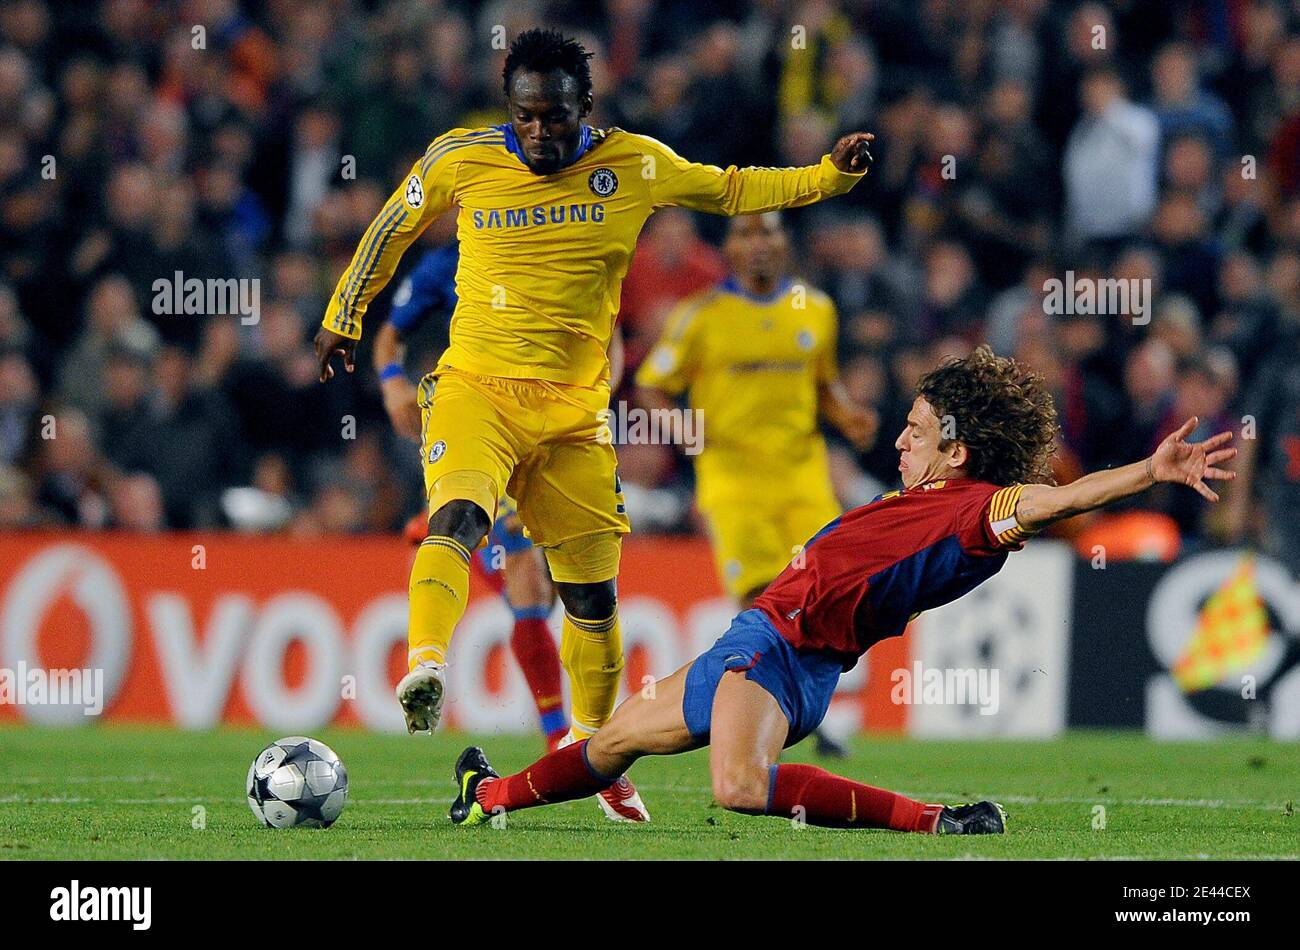 Chelsea S Michael Essien Is Tackled By Fc Barcelona S Carles Puyol During The Uefa Champions League Semi Final First Leg Barcelona Vs Chelsea At The Nou Camp Stadium In Barcelona Spain On April